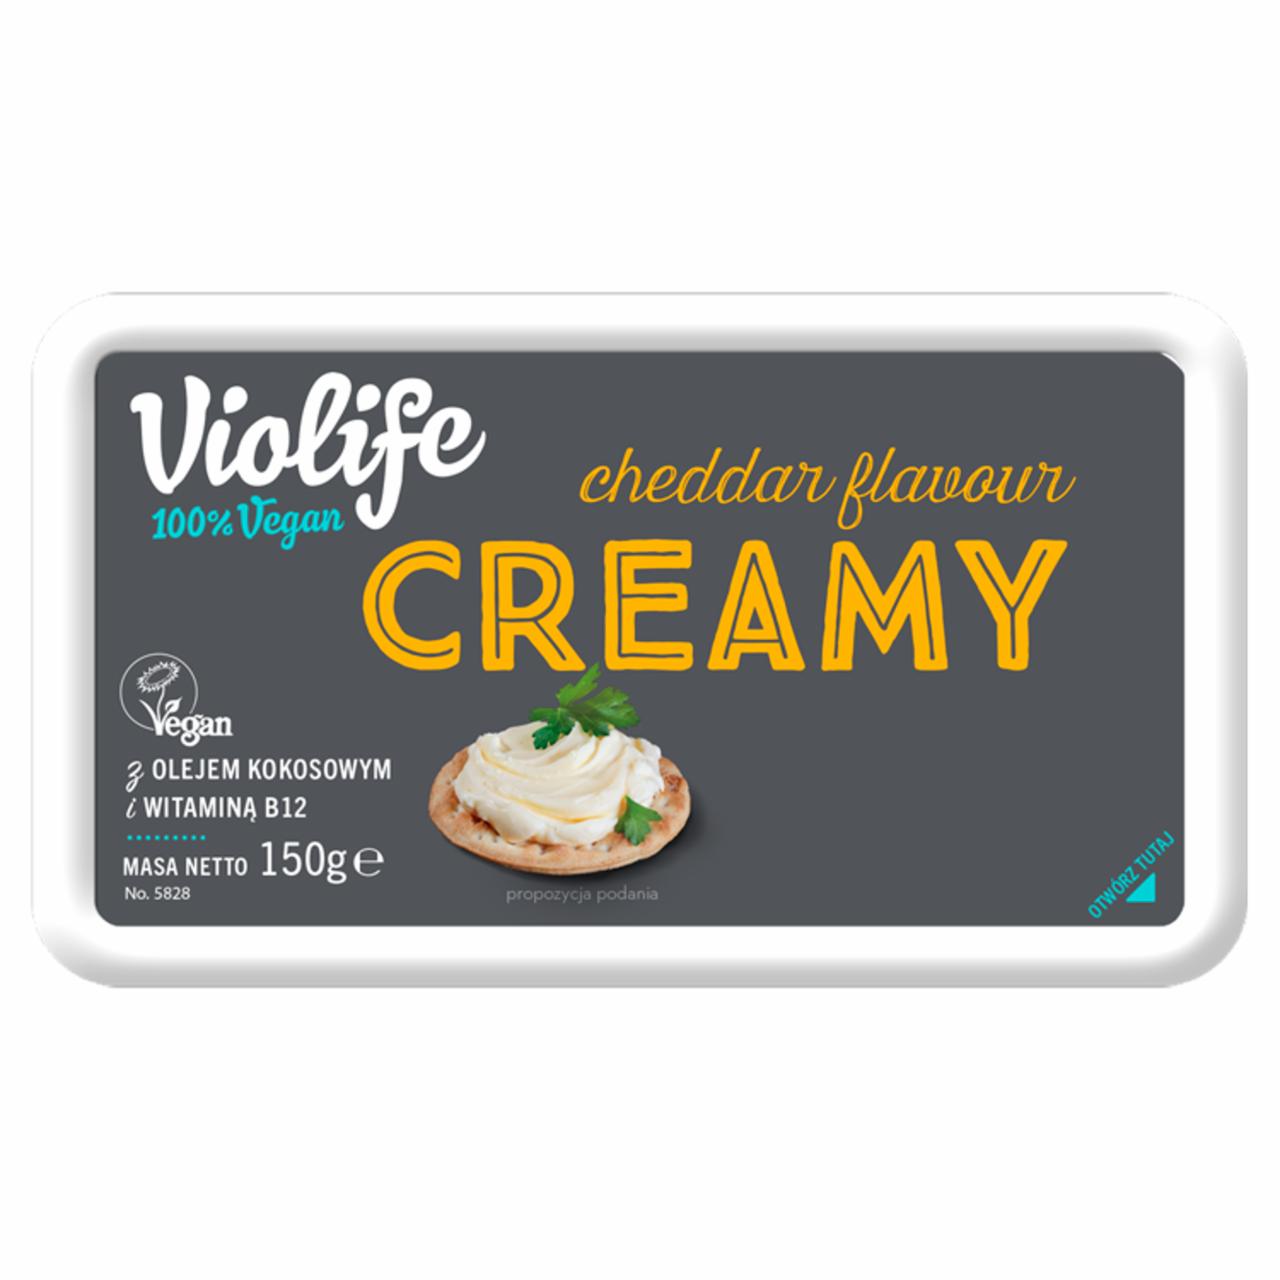 Photo - Violife Cheddar Flavour Creamy Product Based on Coconut Oil 150 g